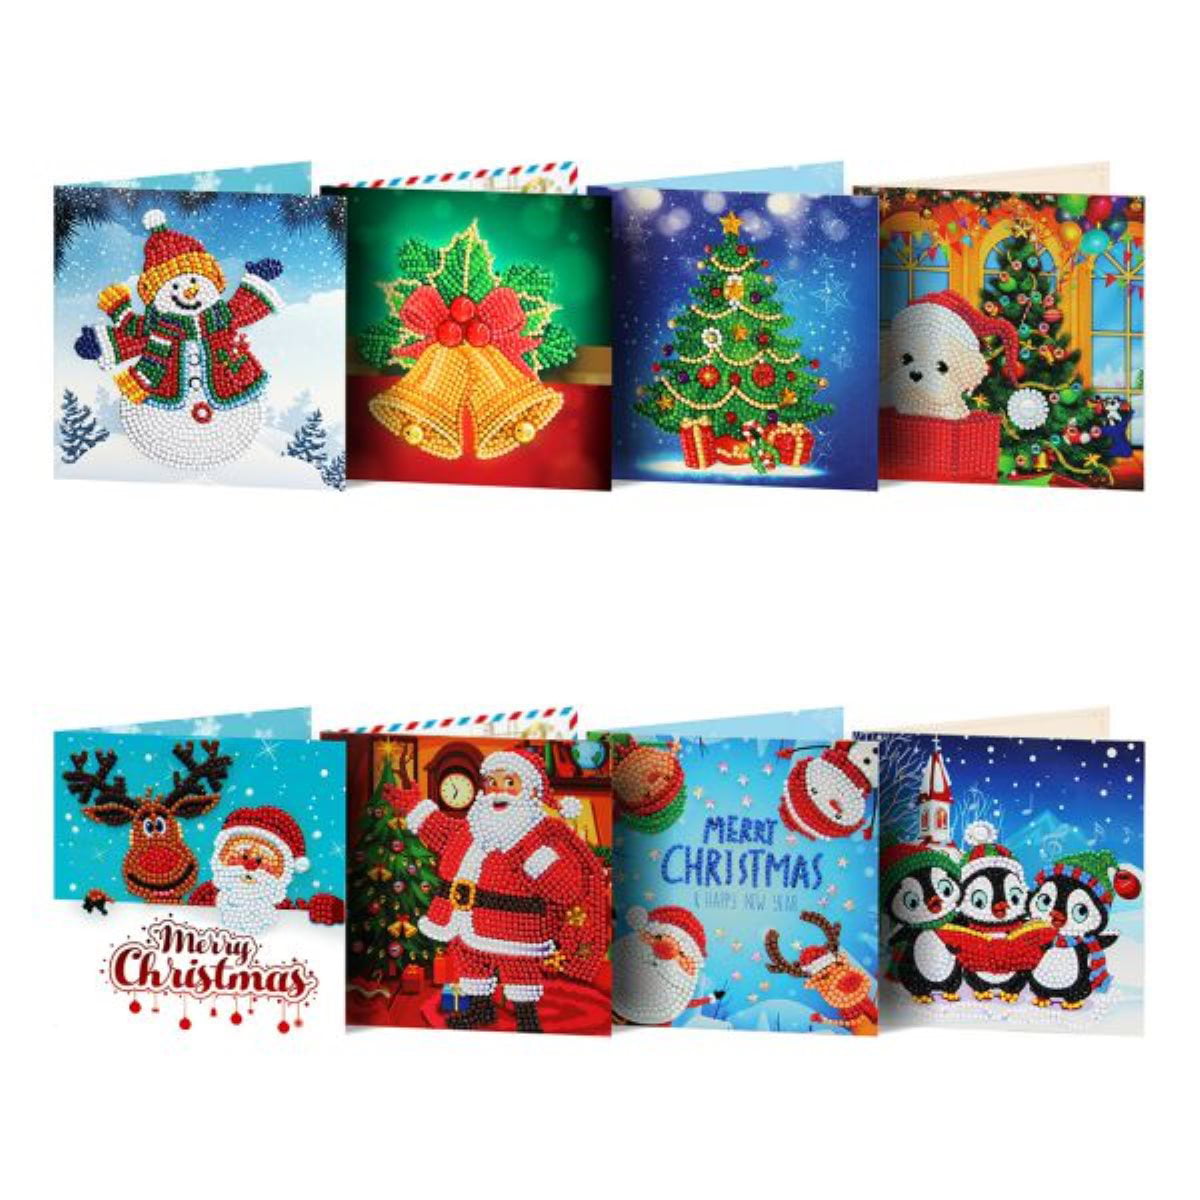 Art Round Diamond Card Creativity for Holiday Family and Friends Thank You 8-Pack Christmas Cards 5D DIY Diamond Painting for Adults Kids Santa Claus Penguin Snowman The Christmas Tree Greeting 